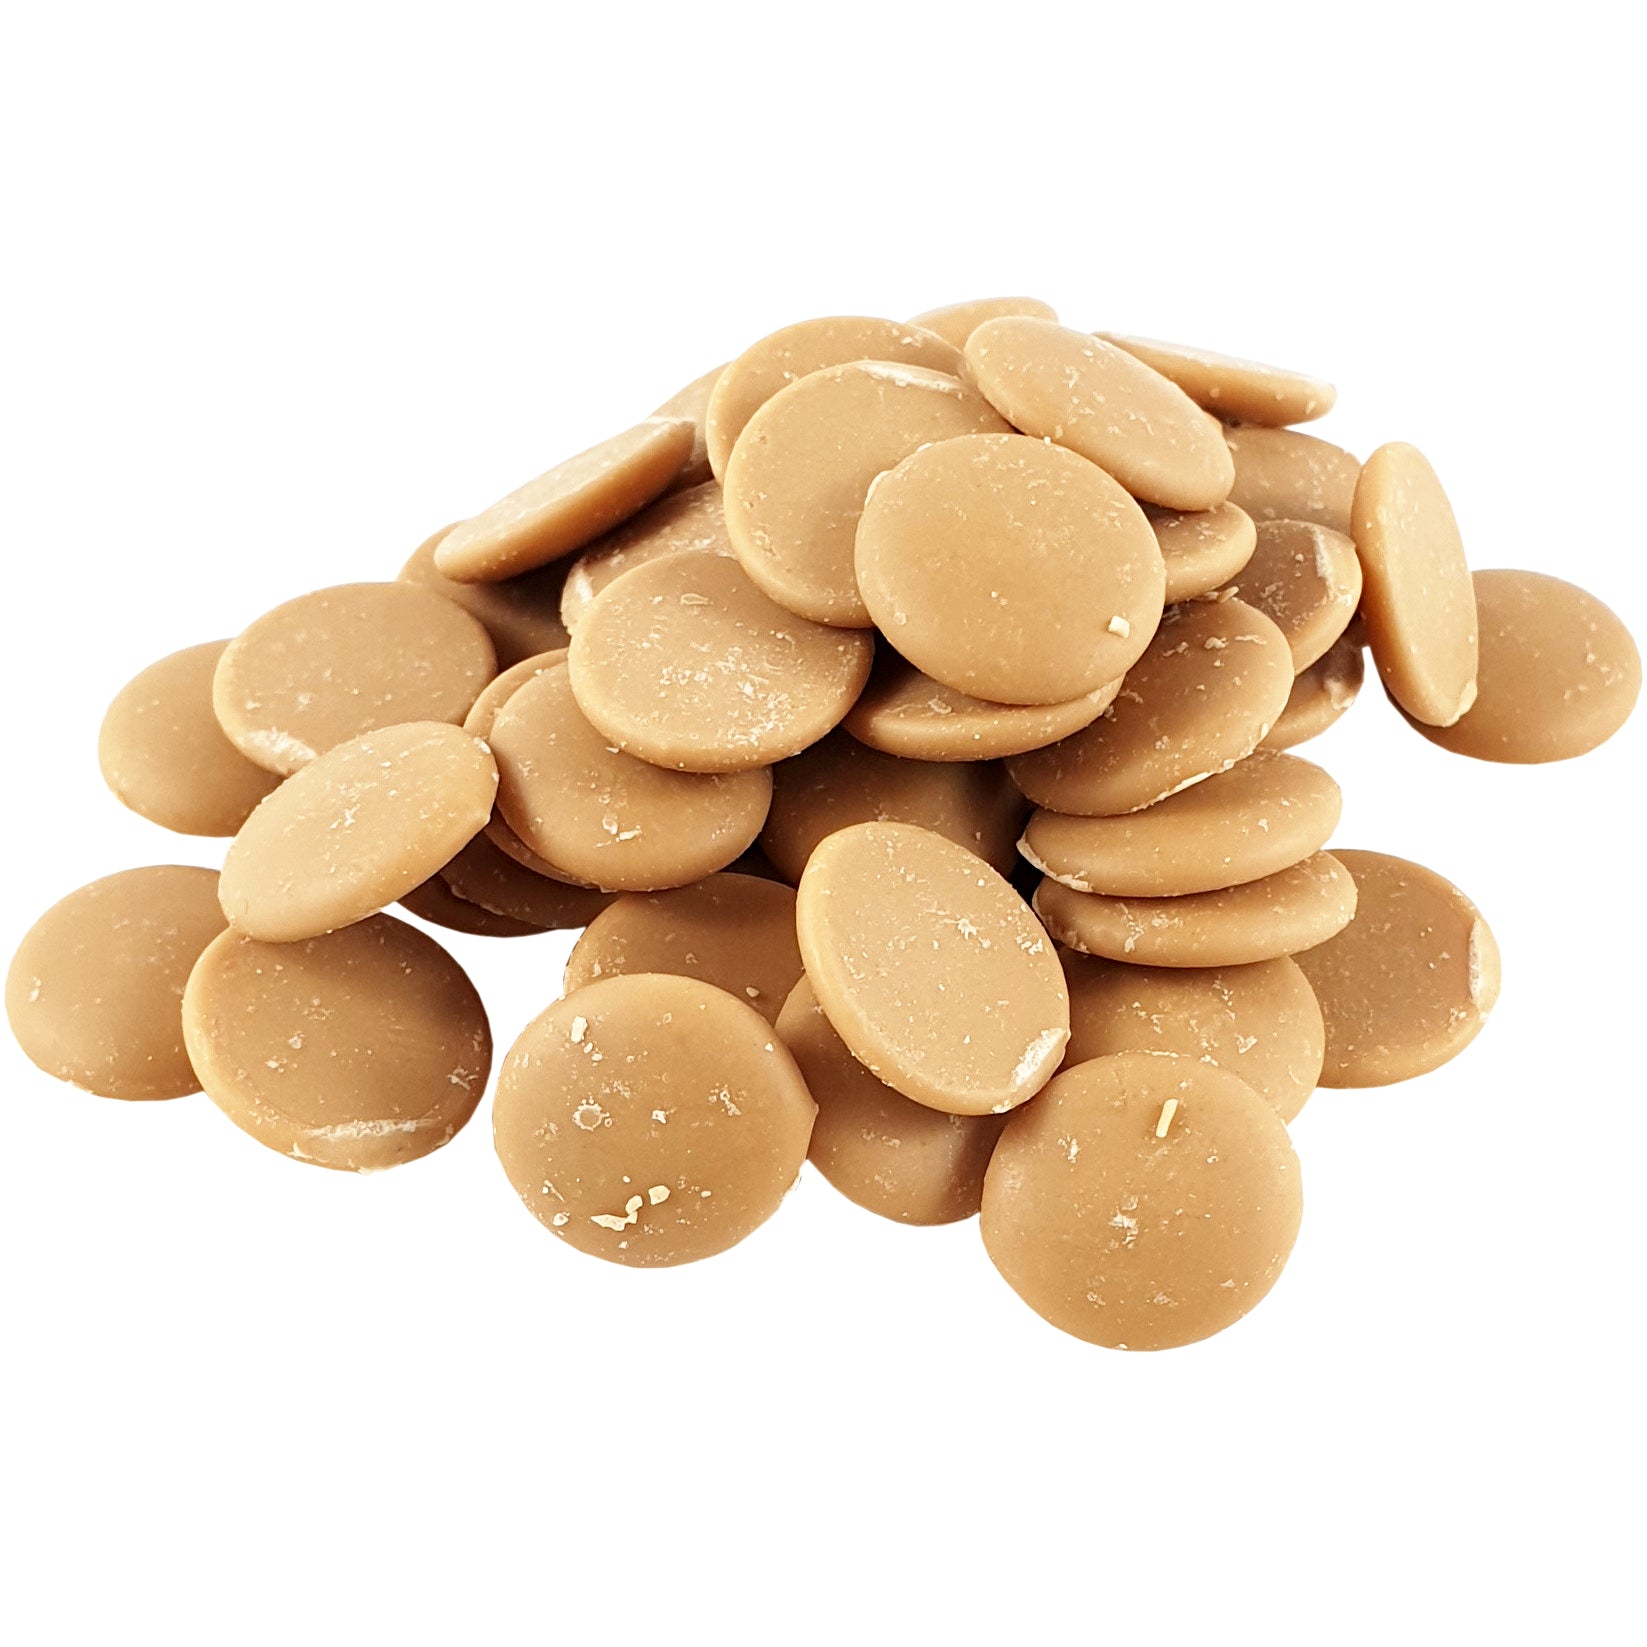 Chocolate Buttons Caramel Couverture chocolate - Gluten Free 500g